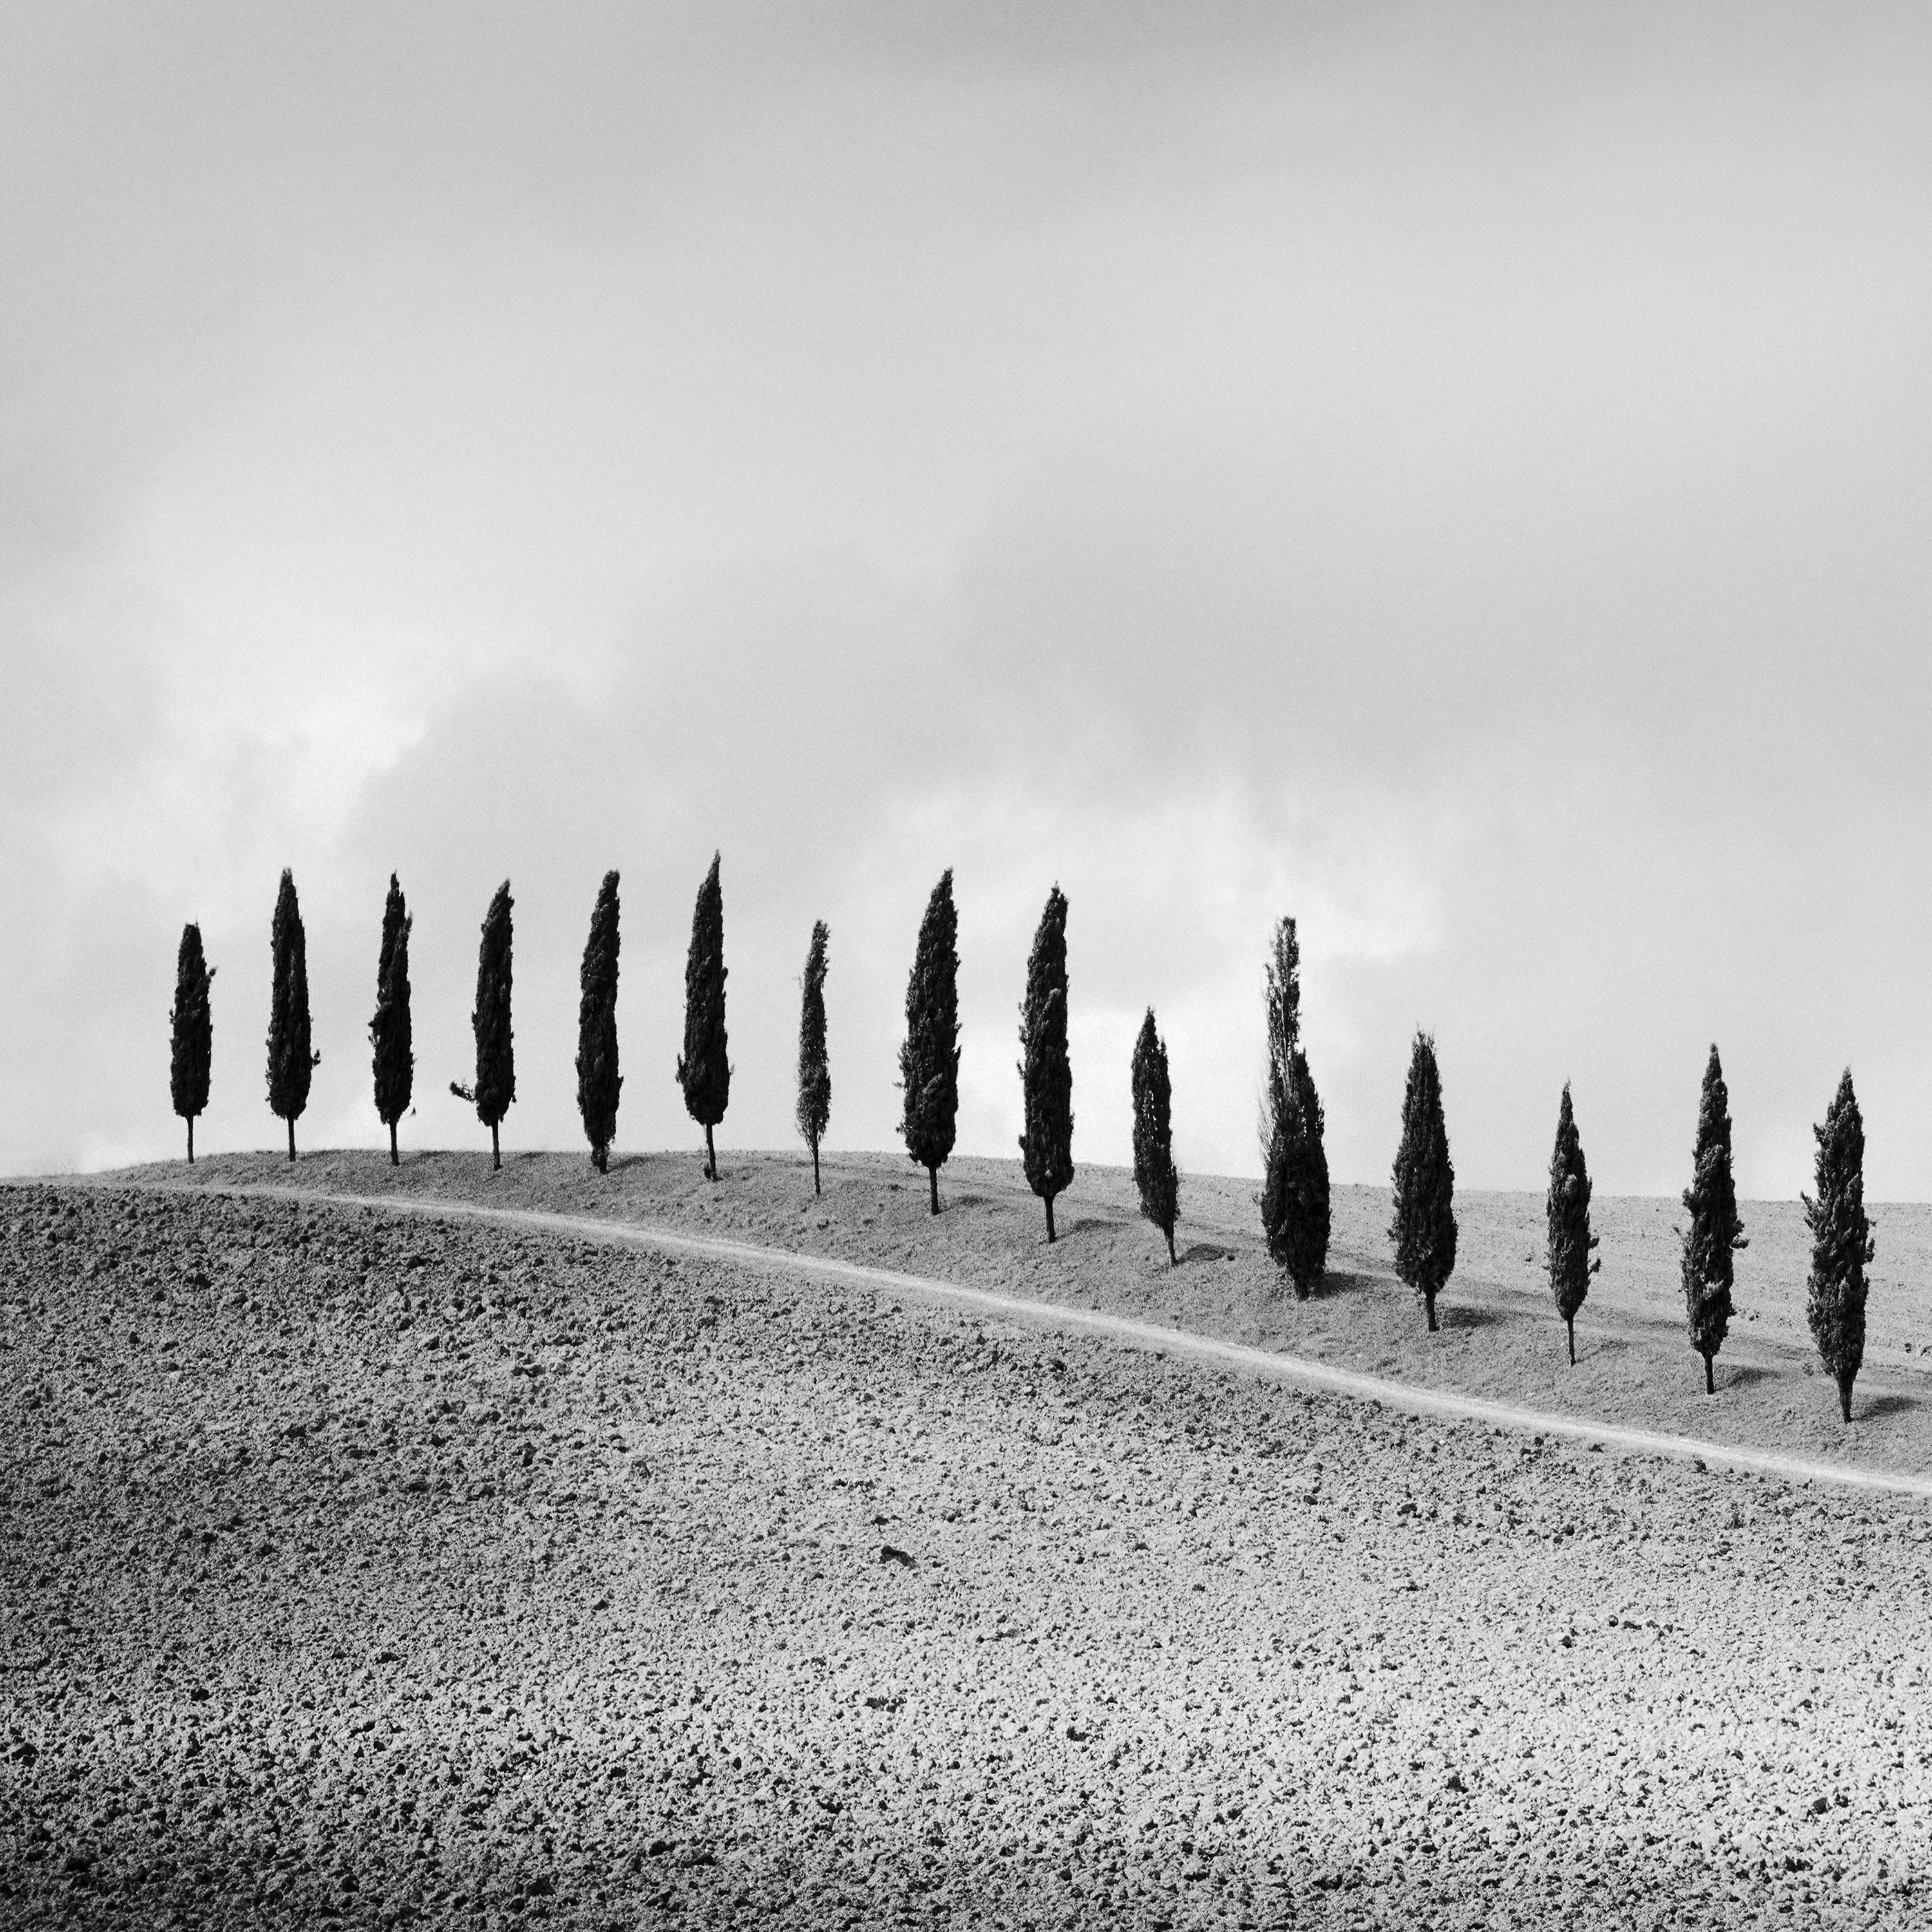 Black and white fine art landscape photography print. Path lined with cypress trees, Tuscany, Italy. Internationally award-winning photography. Archival pigment ink print, edition of 9. Signed, titled, dated and numbered by artist. Certificate of